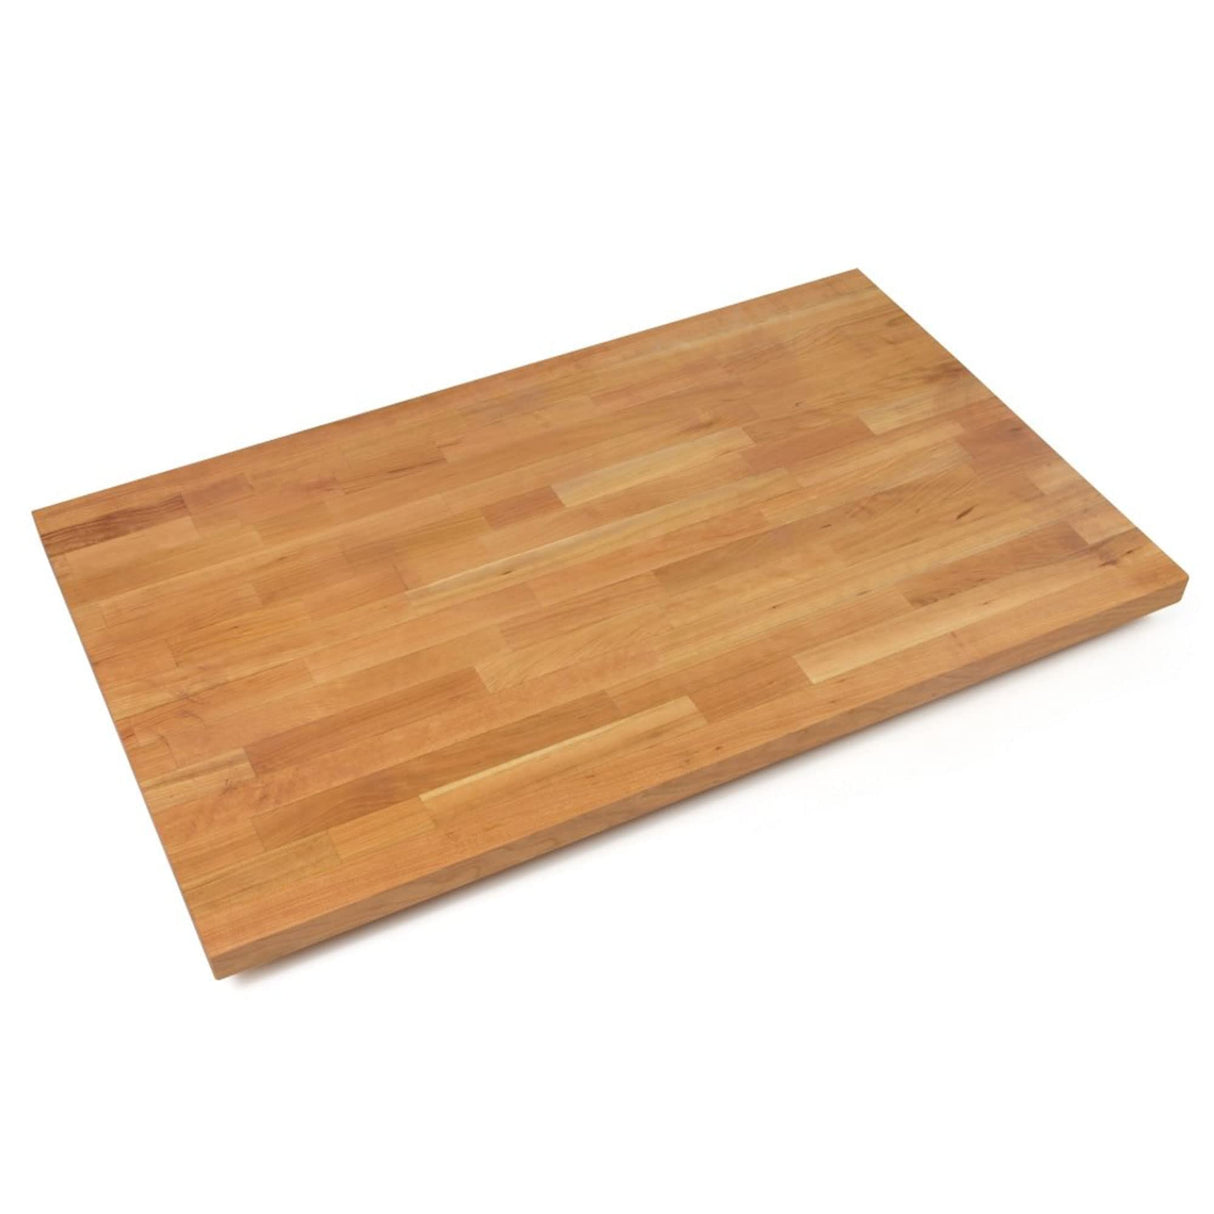 John Boos CHYKCT-BL4225-O Finger Jointed Cherry Wood Rails Kitchen Island Butcher Block Cutting Board Counter Top with Oil Finish, 42" x 25" 1.5" CHERRY BLENDED KCT 42X25X1-1/2 OIL